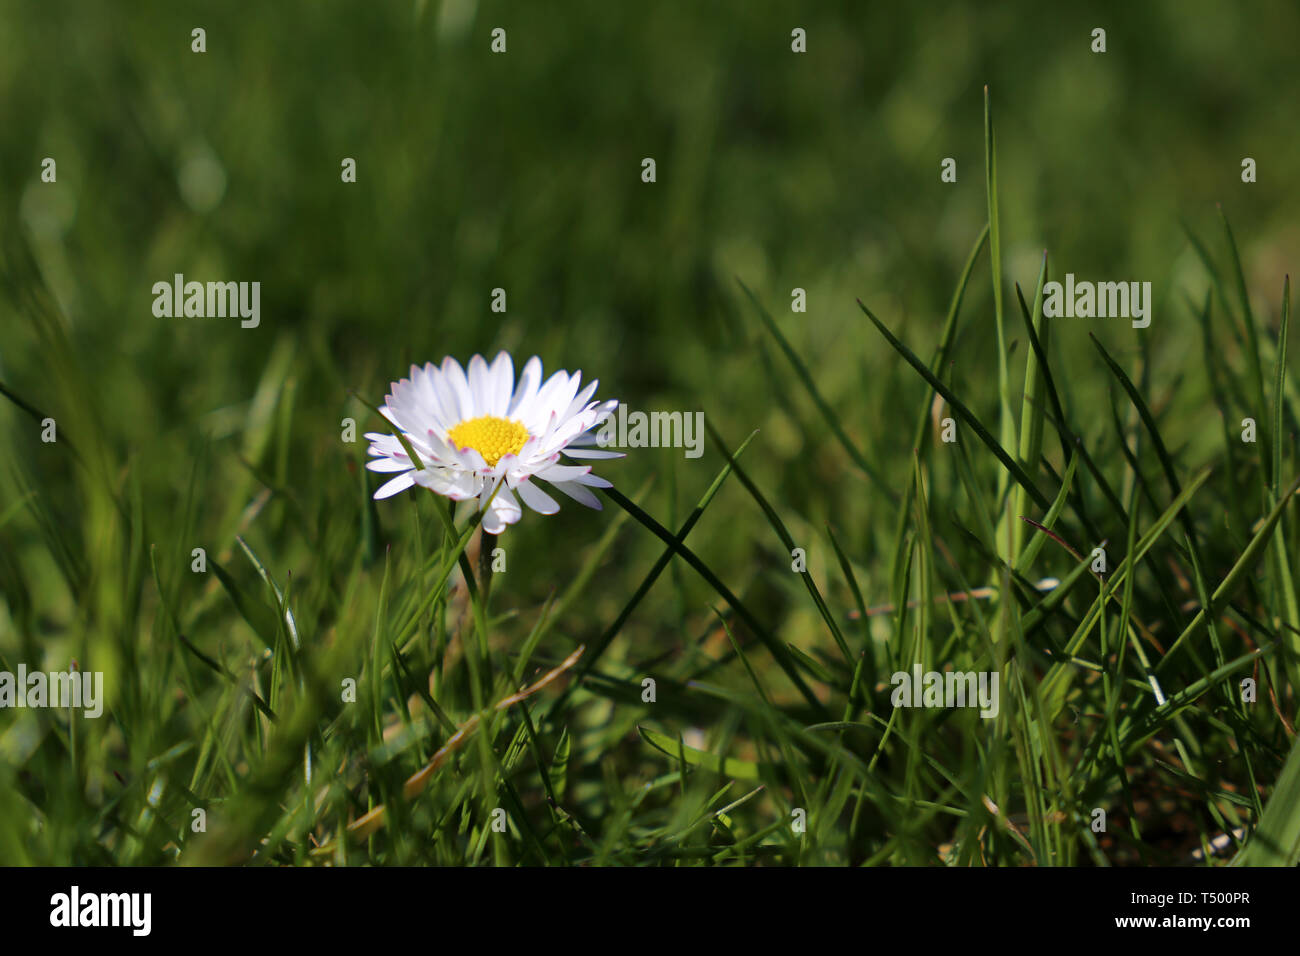 Chamomile flower in the green grass. White daisy on sunny meadow, spring season background Stock Photo